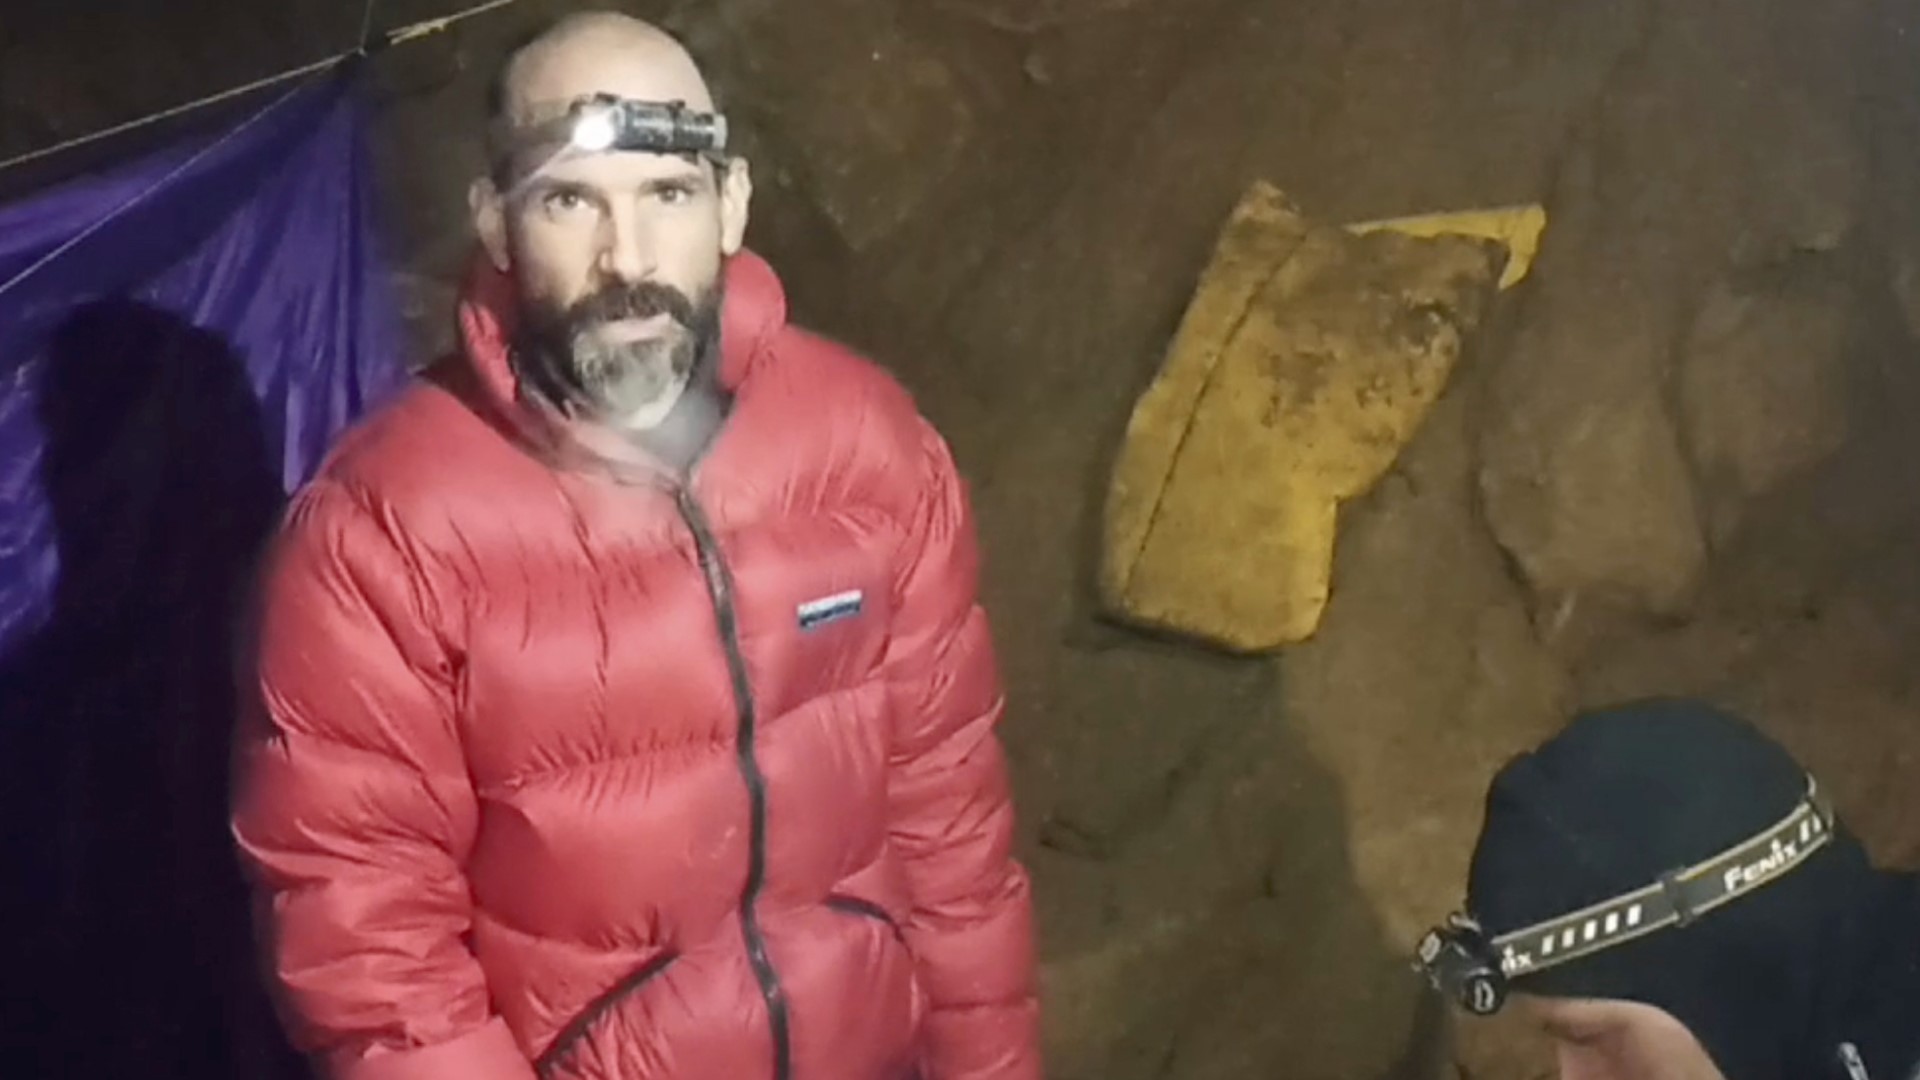 The U.S. researcher trapped deep inside a cave in Turkey after suffering gastrointestinal bleeding spoke about his experience as rescue efforts continued.